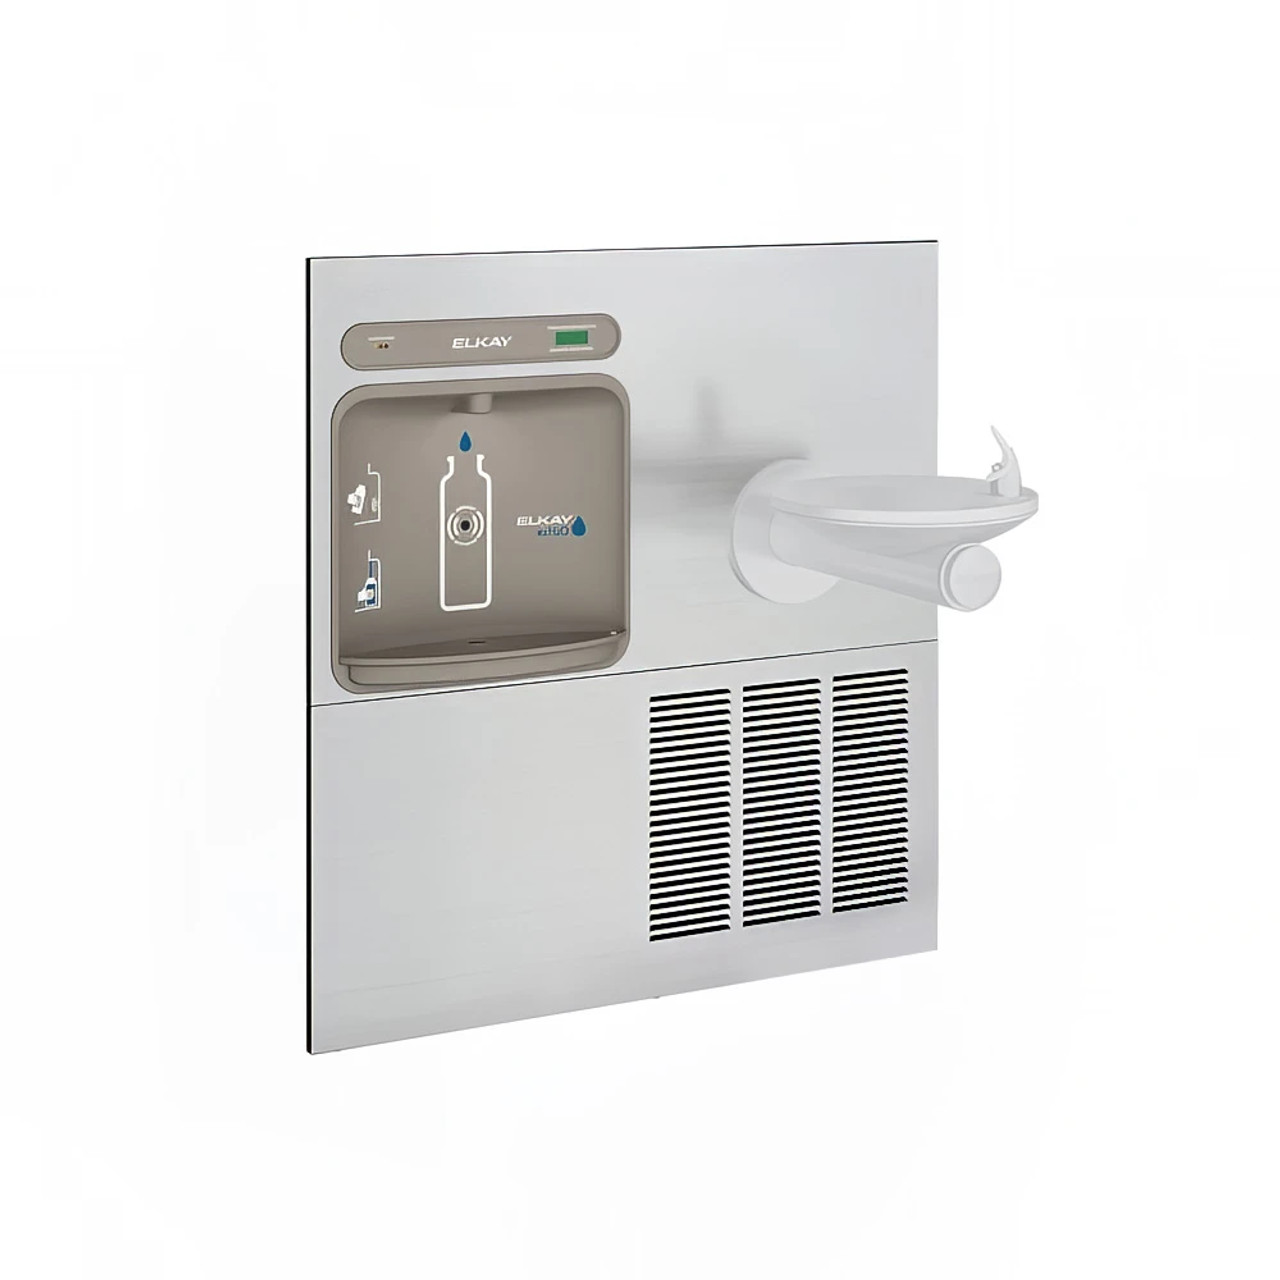 Elkay Wall Mount Bottle Filling Station - Refrigerated, Filtered - Chicken Pieces